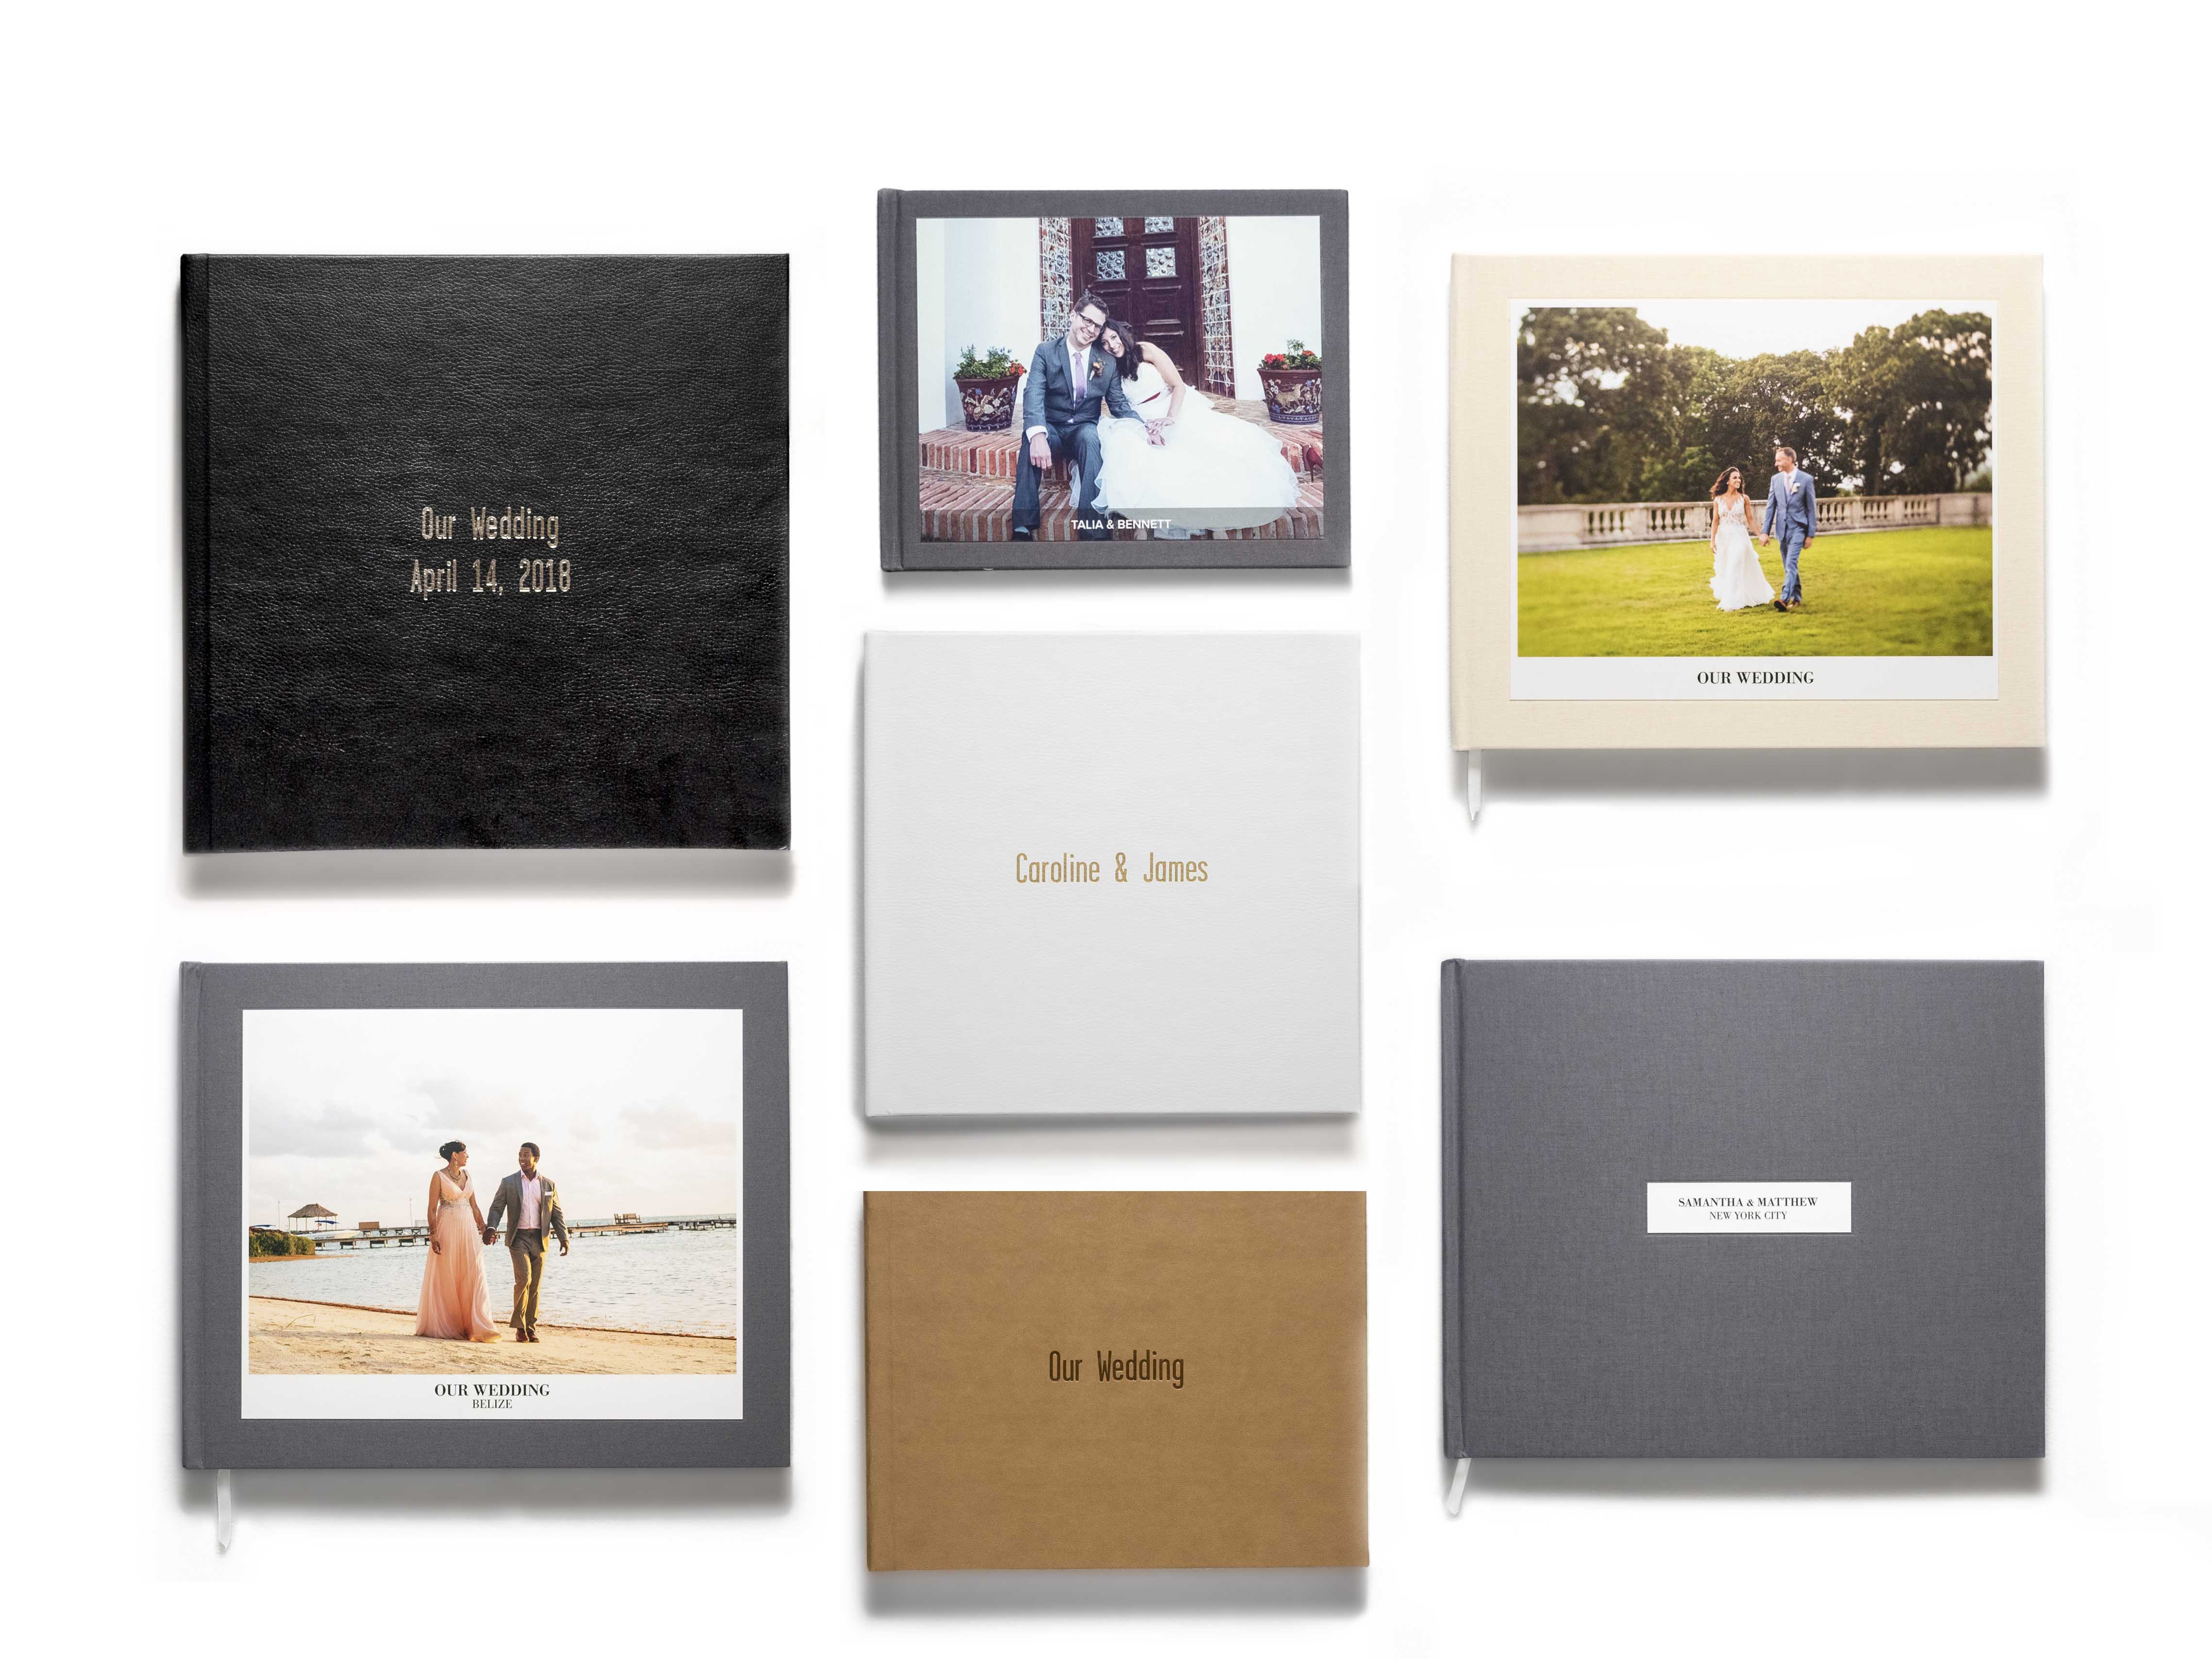 Five Things to Know Before Making Your Wedding Album